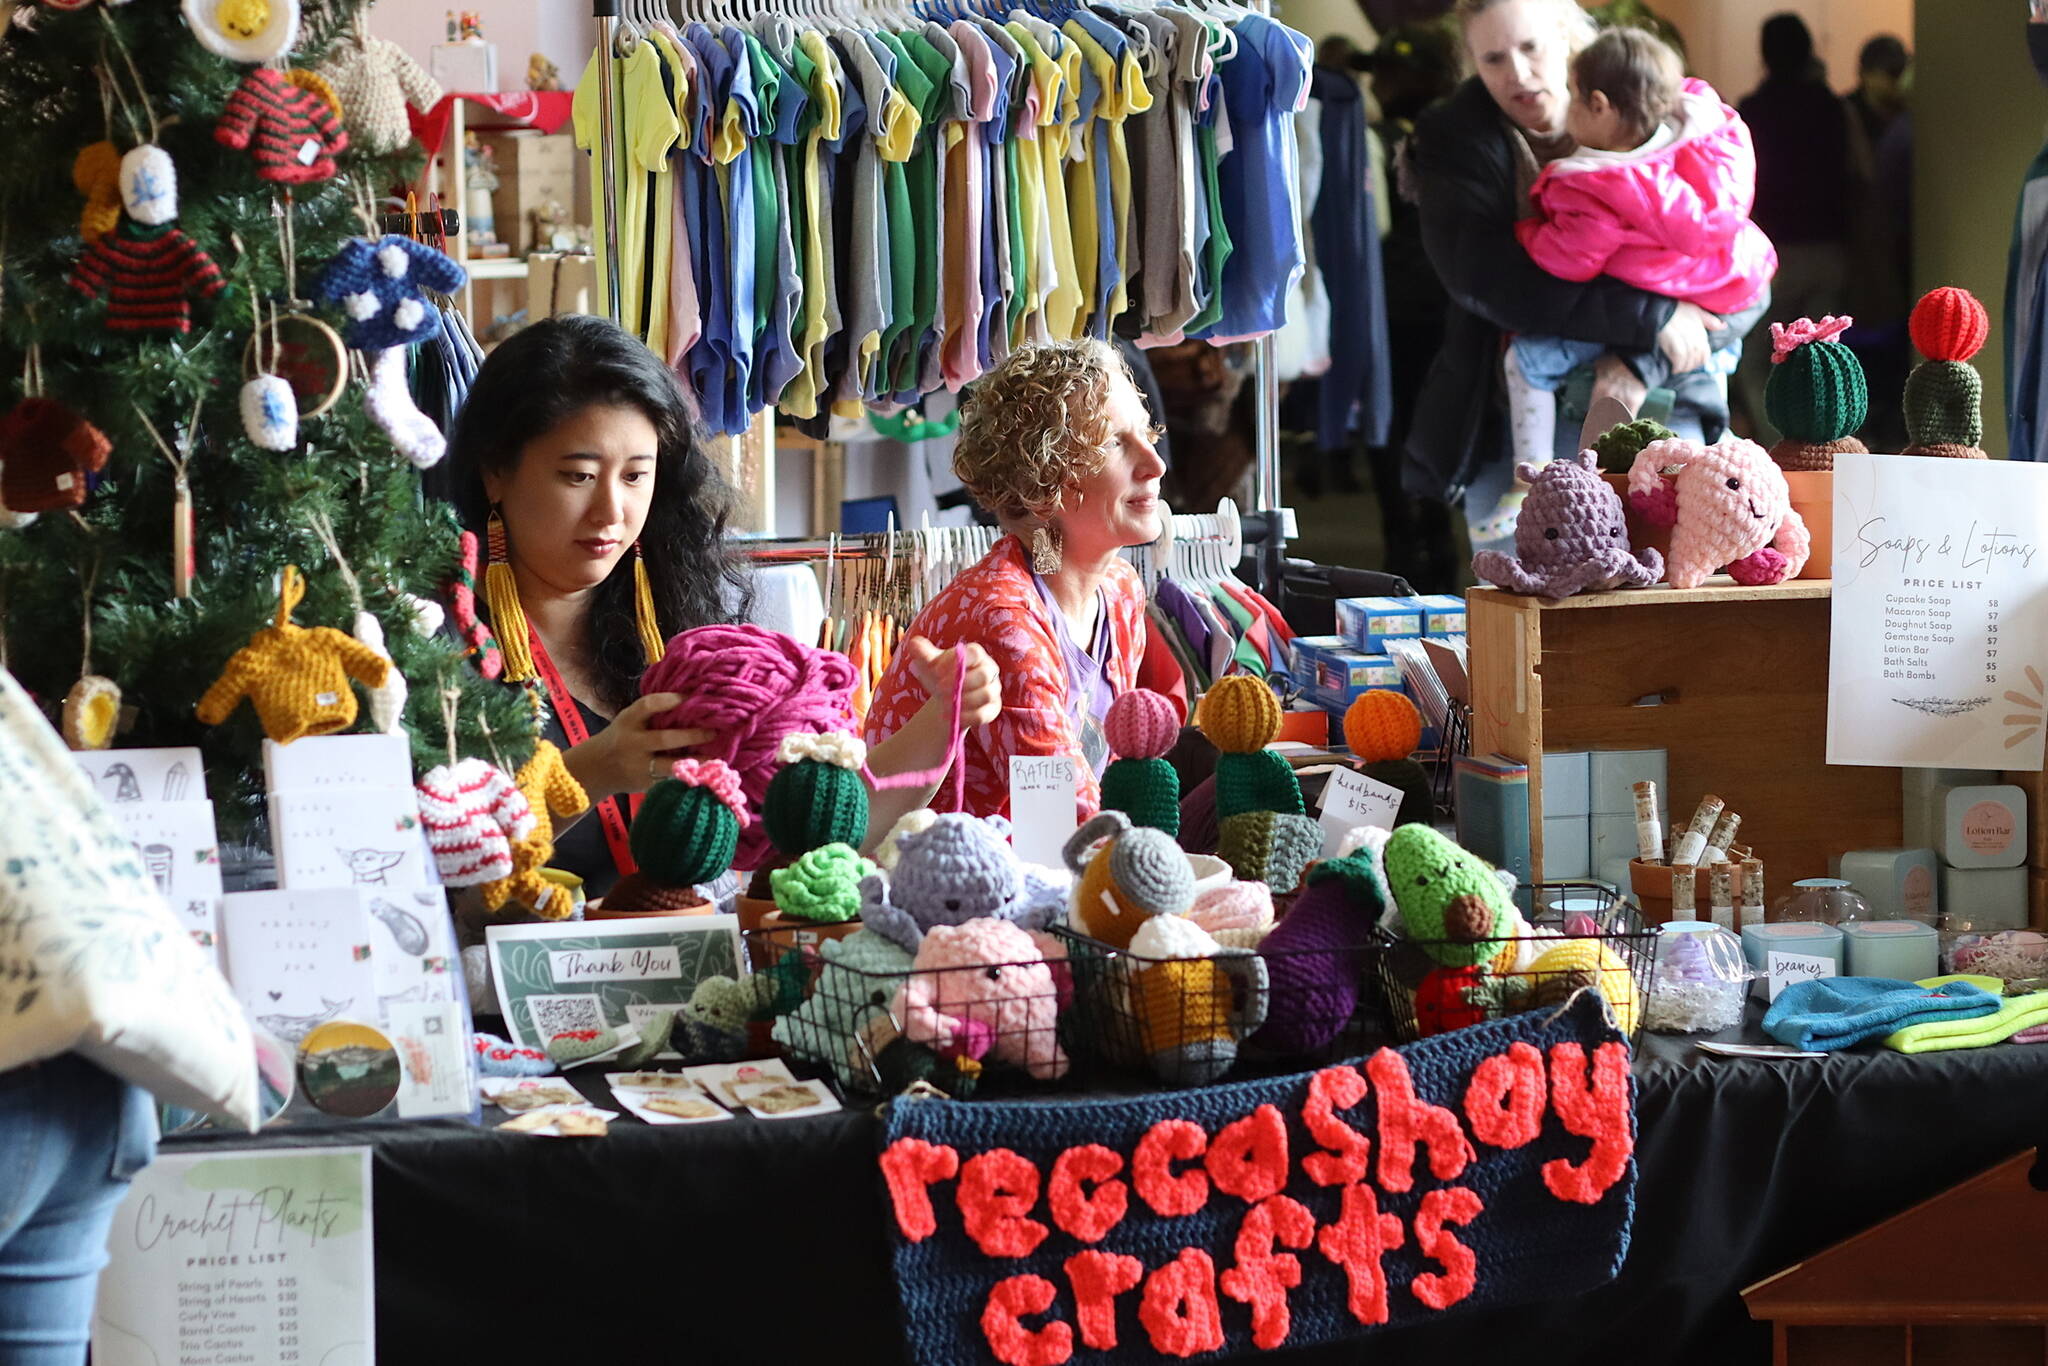 Rebecca Hsieh, left, knits small gifts as a first-time vendor at the Juneau Public Market as her friend, MK MacNaughton, a longtime vendor sells hand-painted items near the entrance of Centennial Hall on Saturday. The market, celebrating its 40th year, is scheduled to continue from 10 a.m. to 5 p.m. Sunday. (Mark Sabbatini / Juneau Empire)